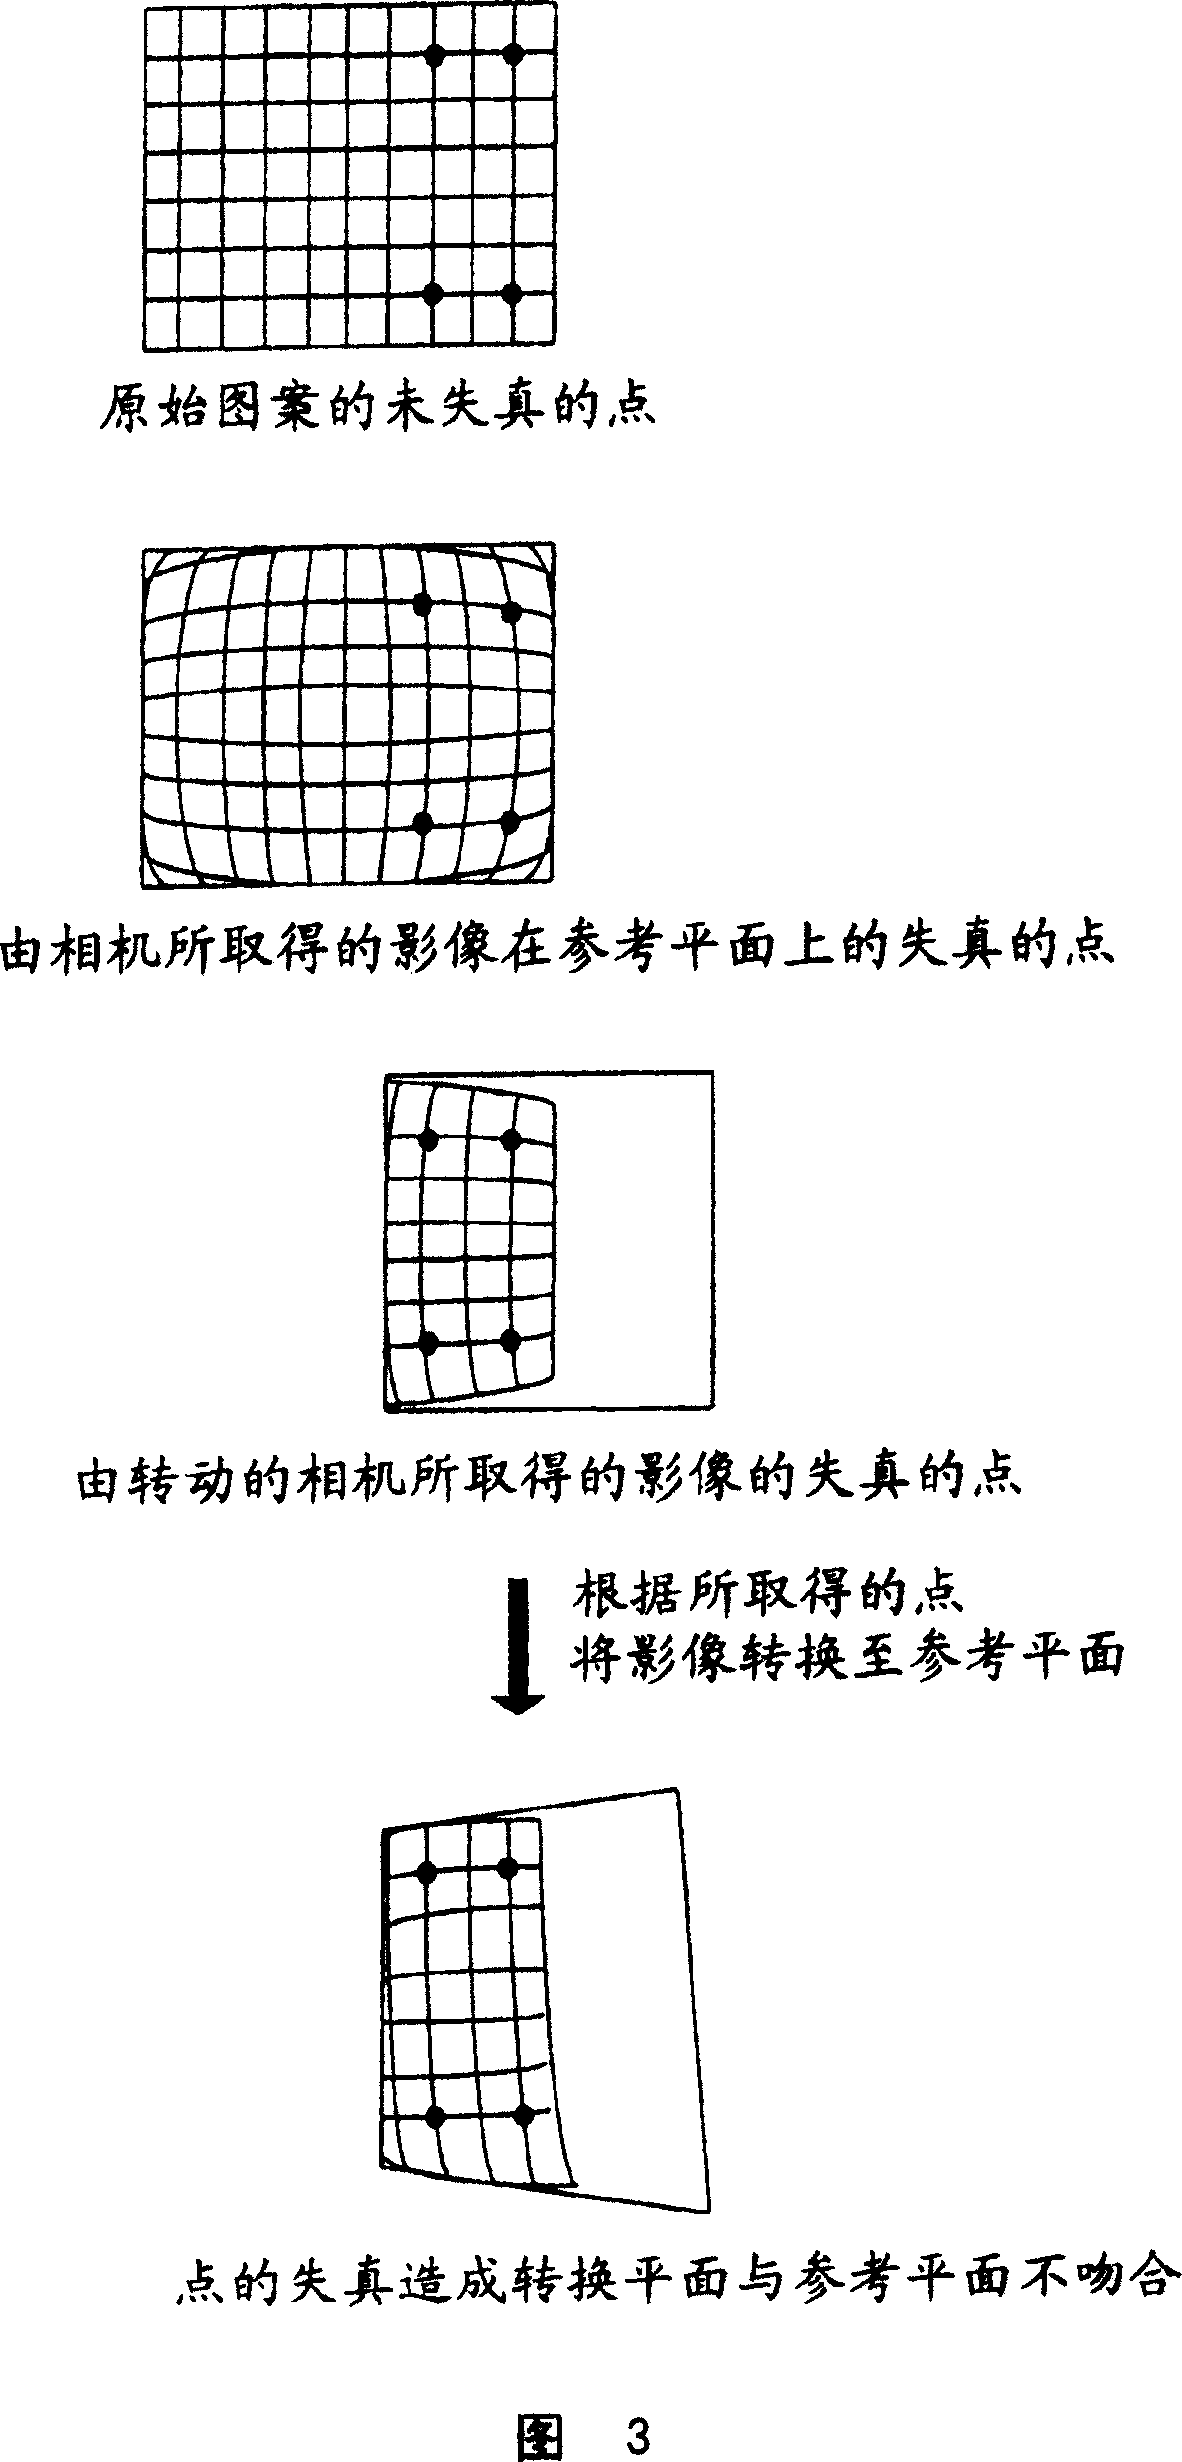 Method and apparatus for improving image joint accuracy using lens distortion correction